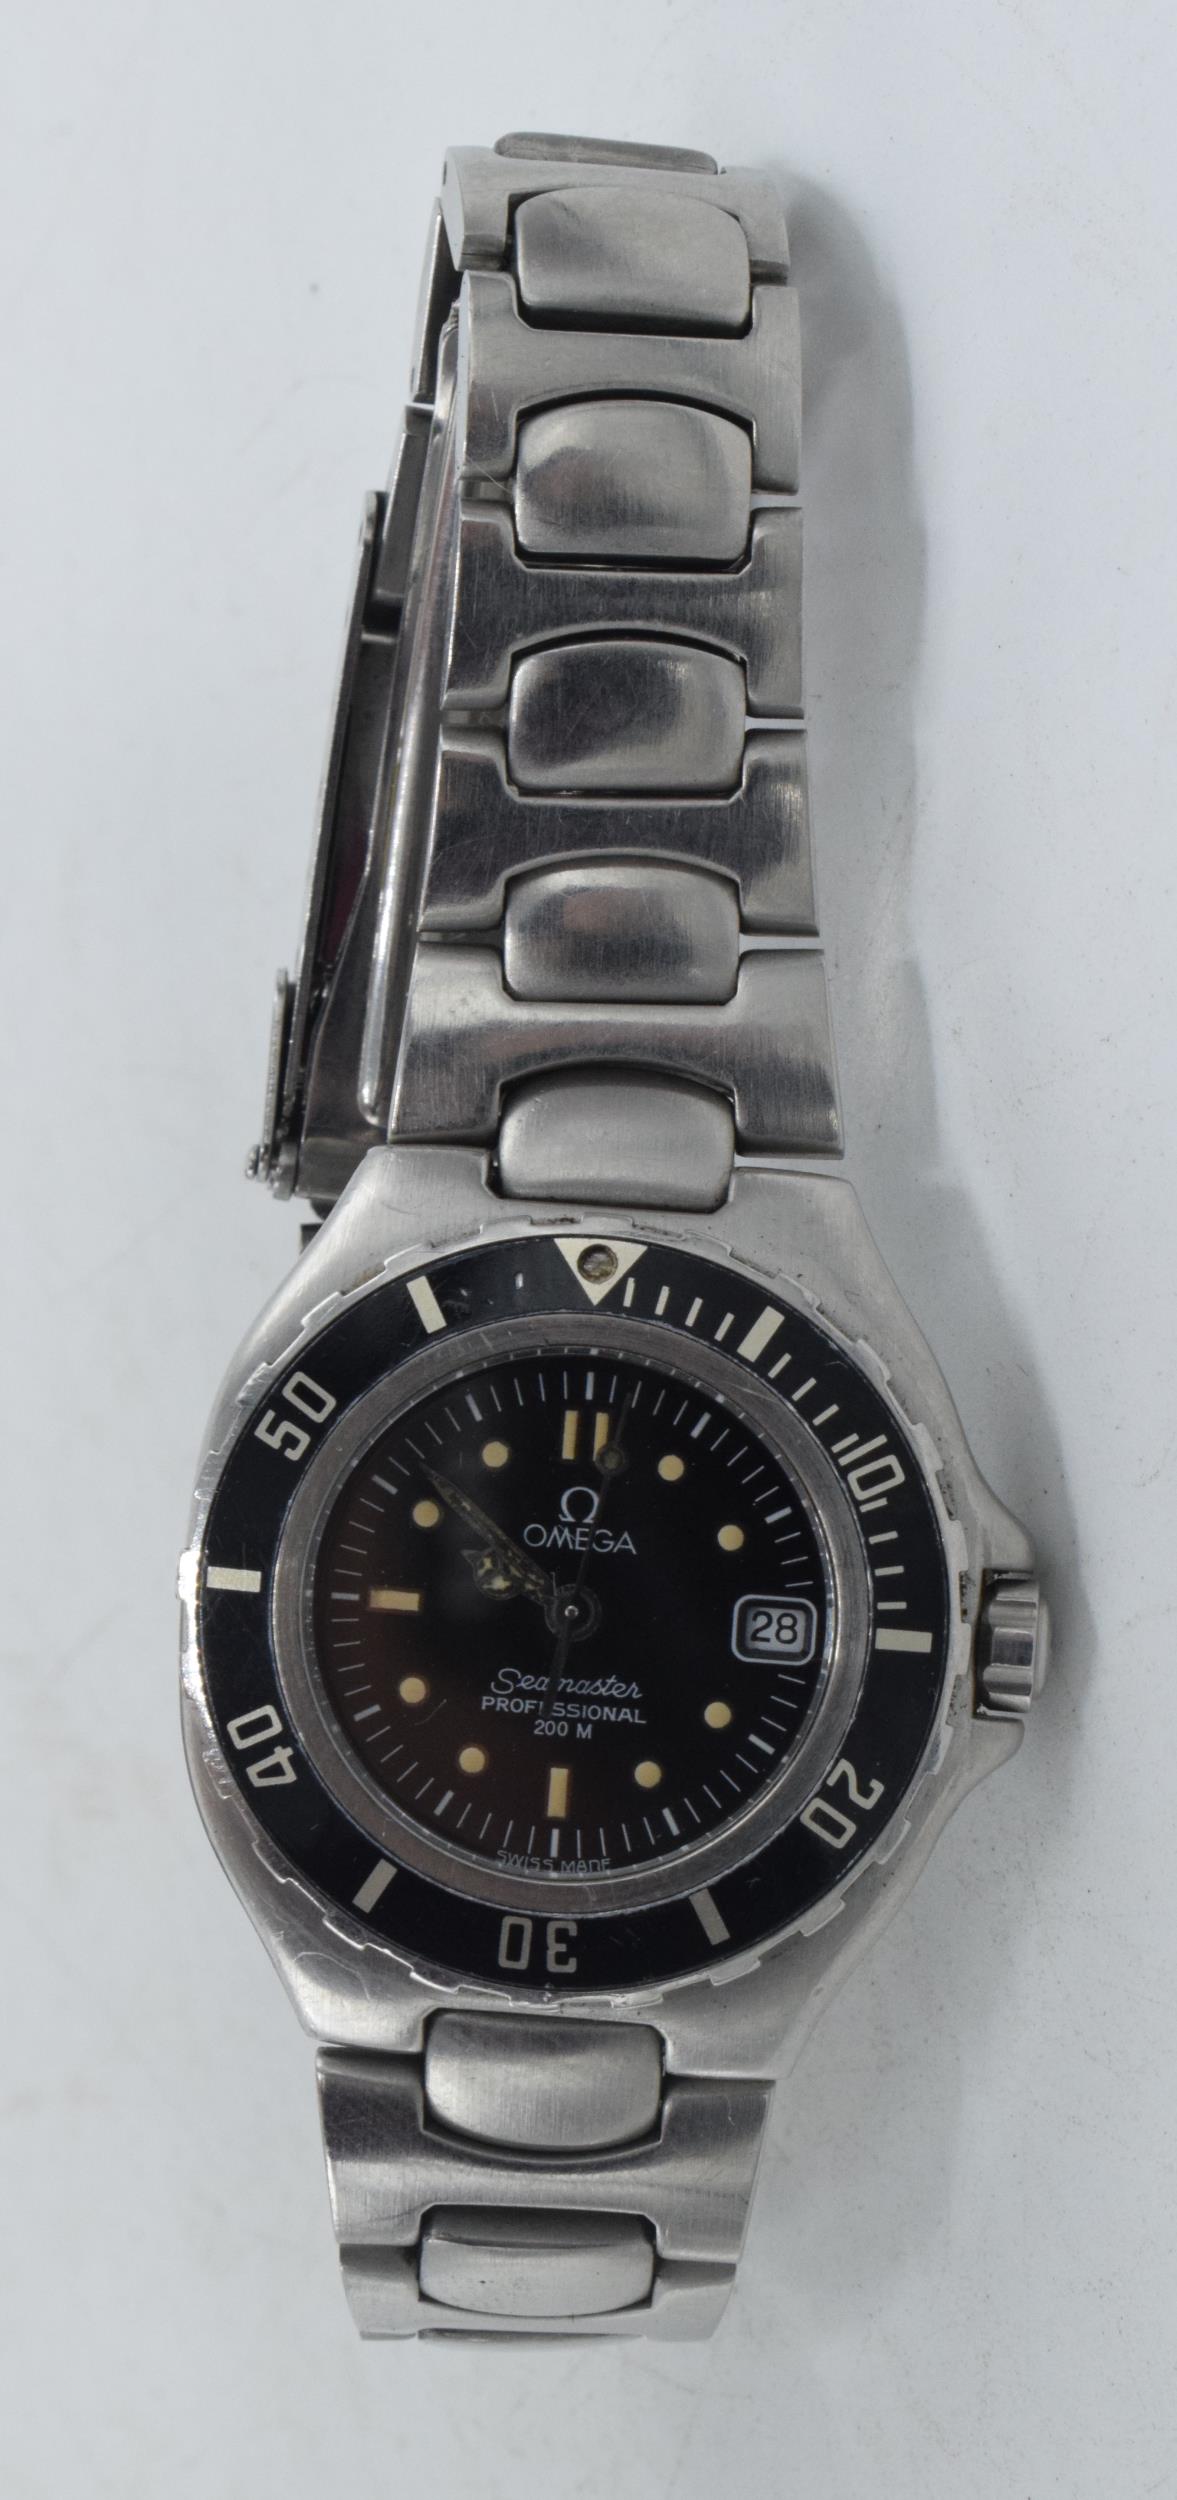 Boxed Omega Seamaster Professional 200 M, stainless steel bracelet, in working / ticking order, 28mm - Image 6 of 6